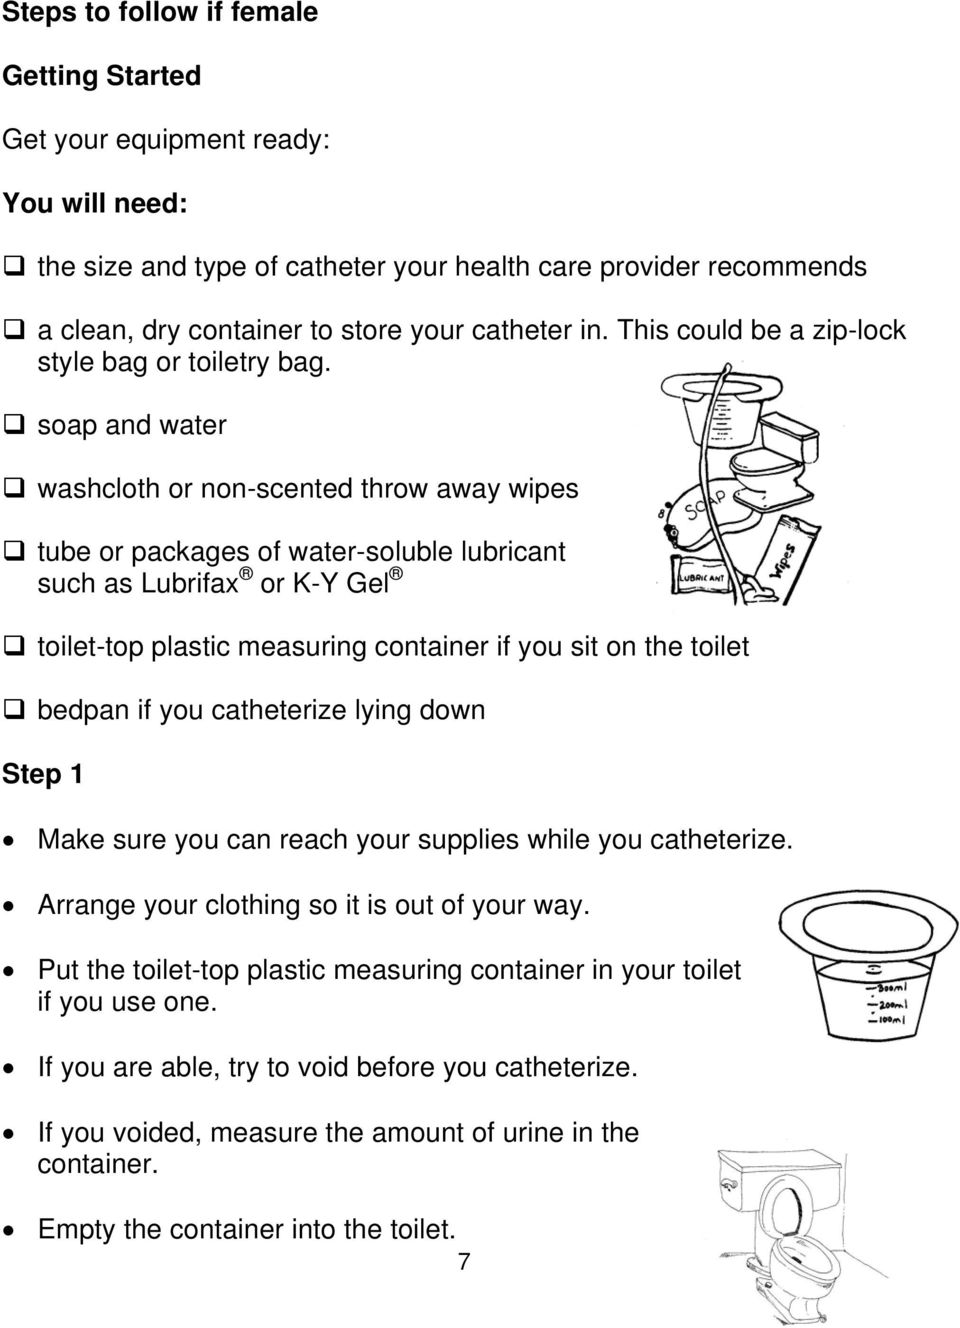 soap and water washcloth or non-scented throw away wipes tube or packages of water-soluble lubricant such as Lubrifax or K-Y Gel toilet-top plastic measuring container if you sit on the toilet bedpan